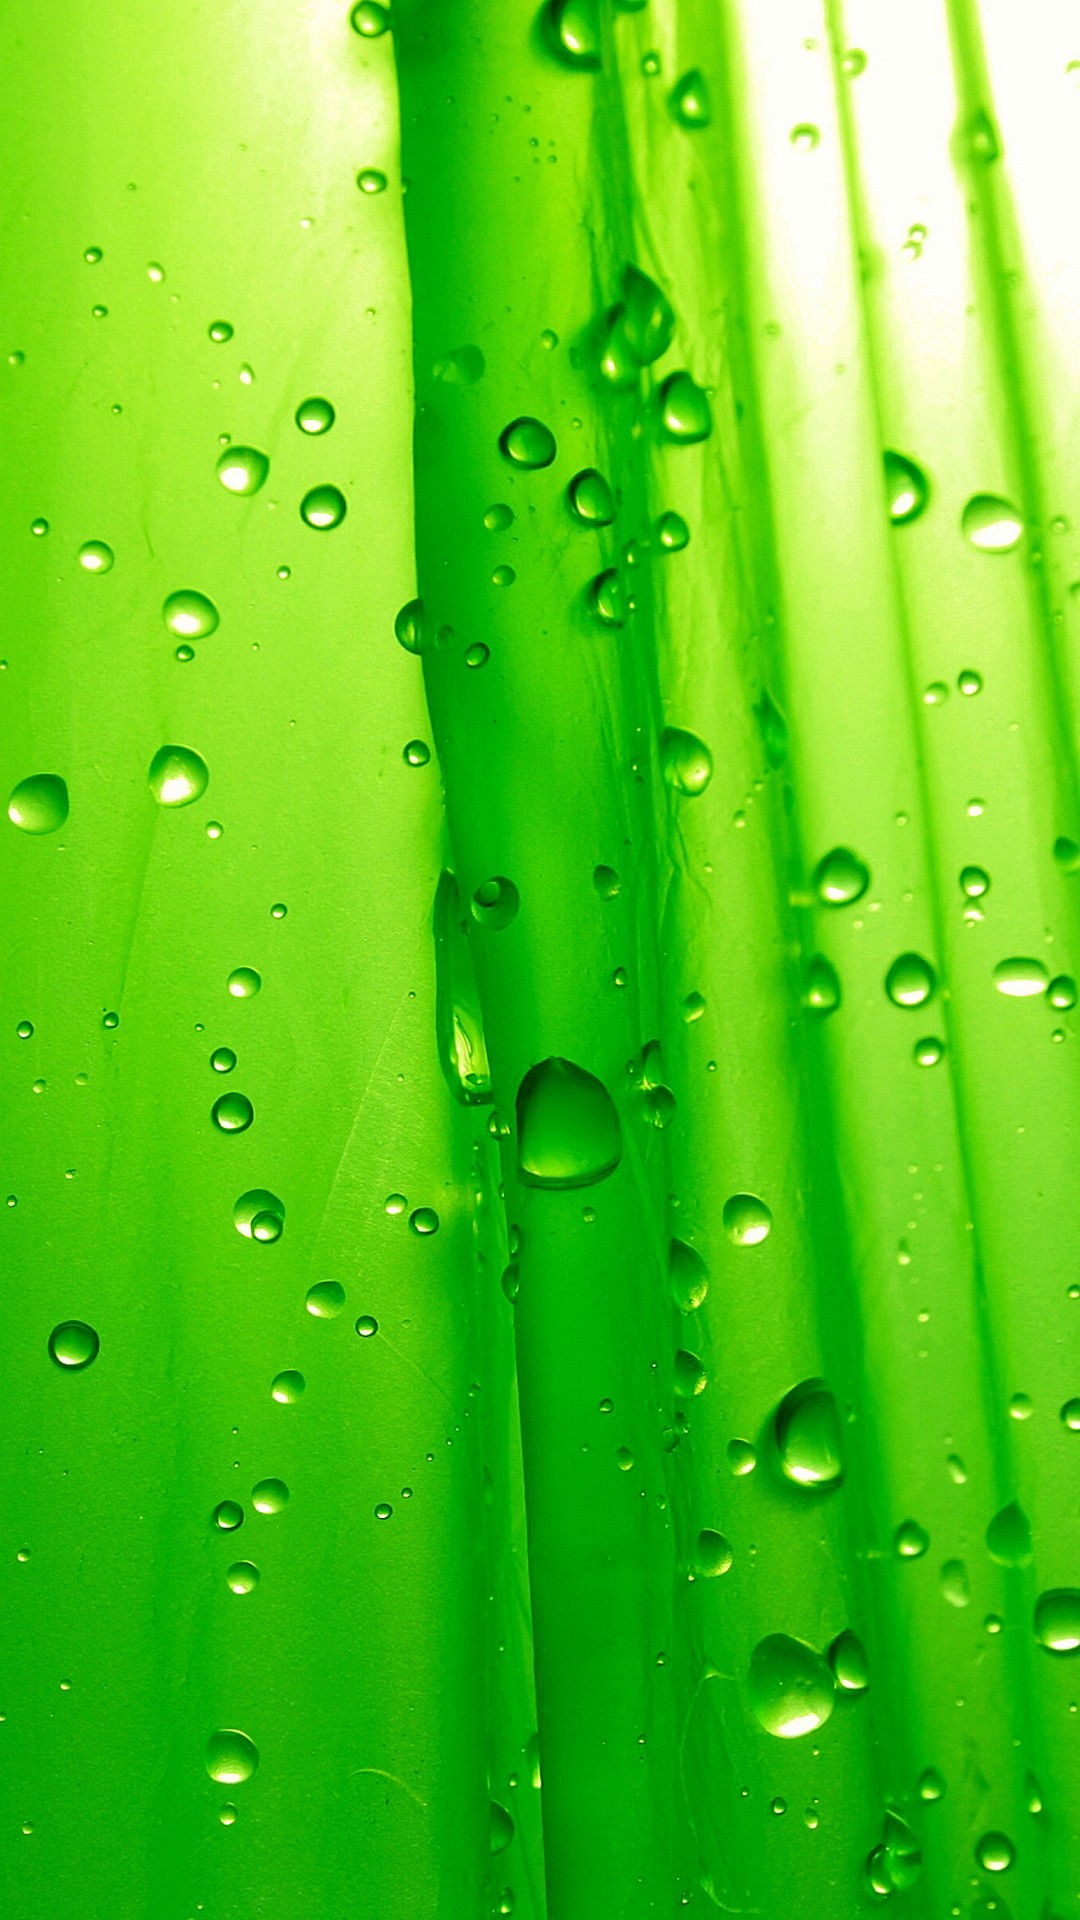 Neon Green HD Wallpapers For Android with image resolution 1080x1920 pixel. You can make this wallpaper for your Android backgrounds, Tablet, Smartphones Screensavers and Mobile Phone Lock Screen